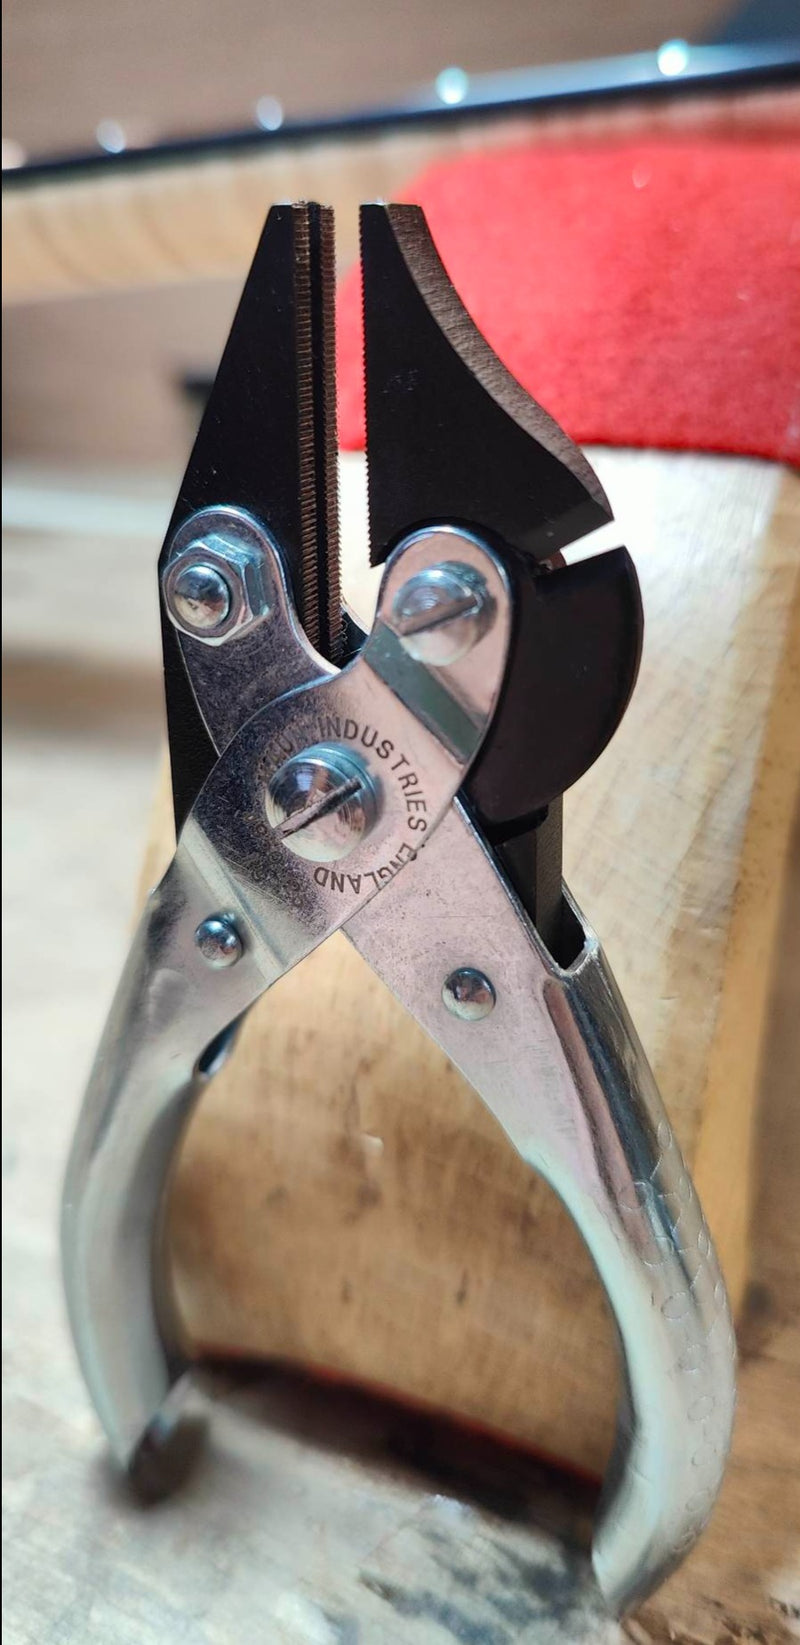 New Precision Multi-Use Parallel Pliers